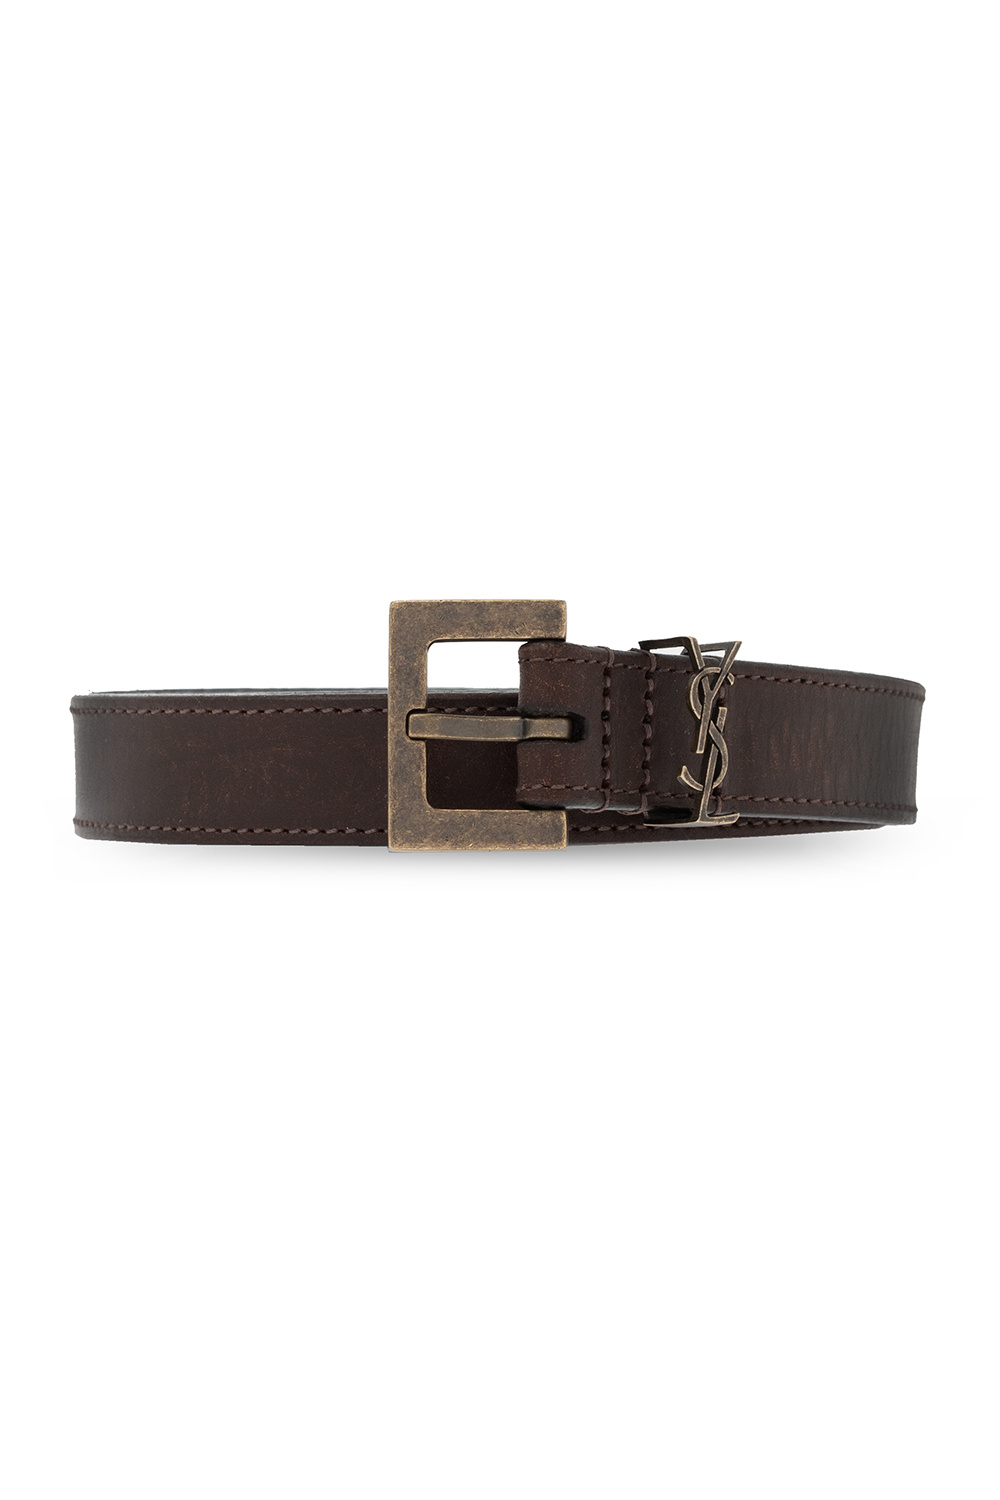 Leather belt Louis Vuitton X NBA Brown size 90 cm in Leather